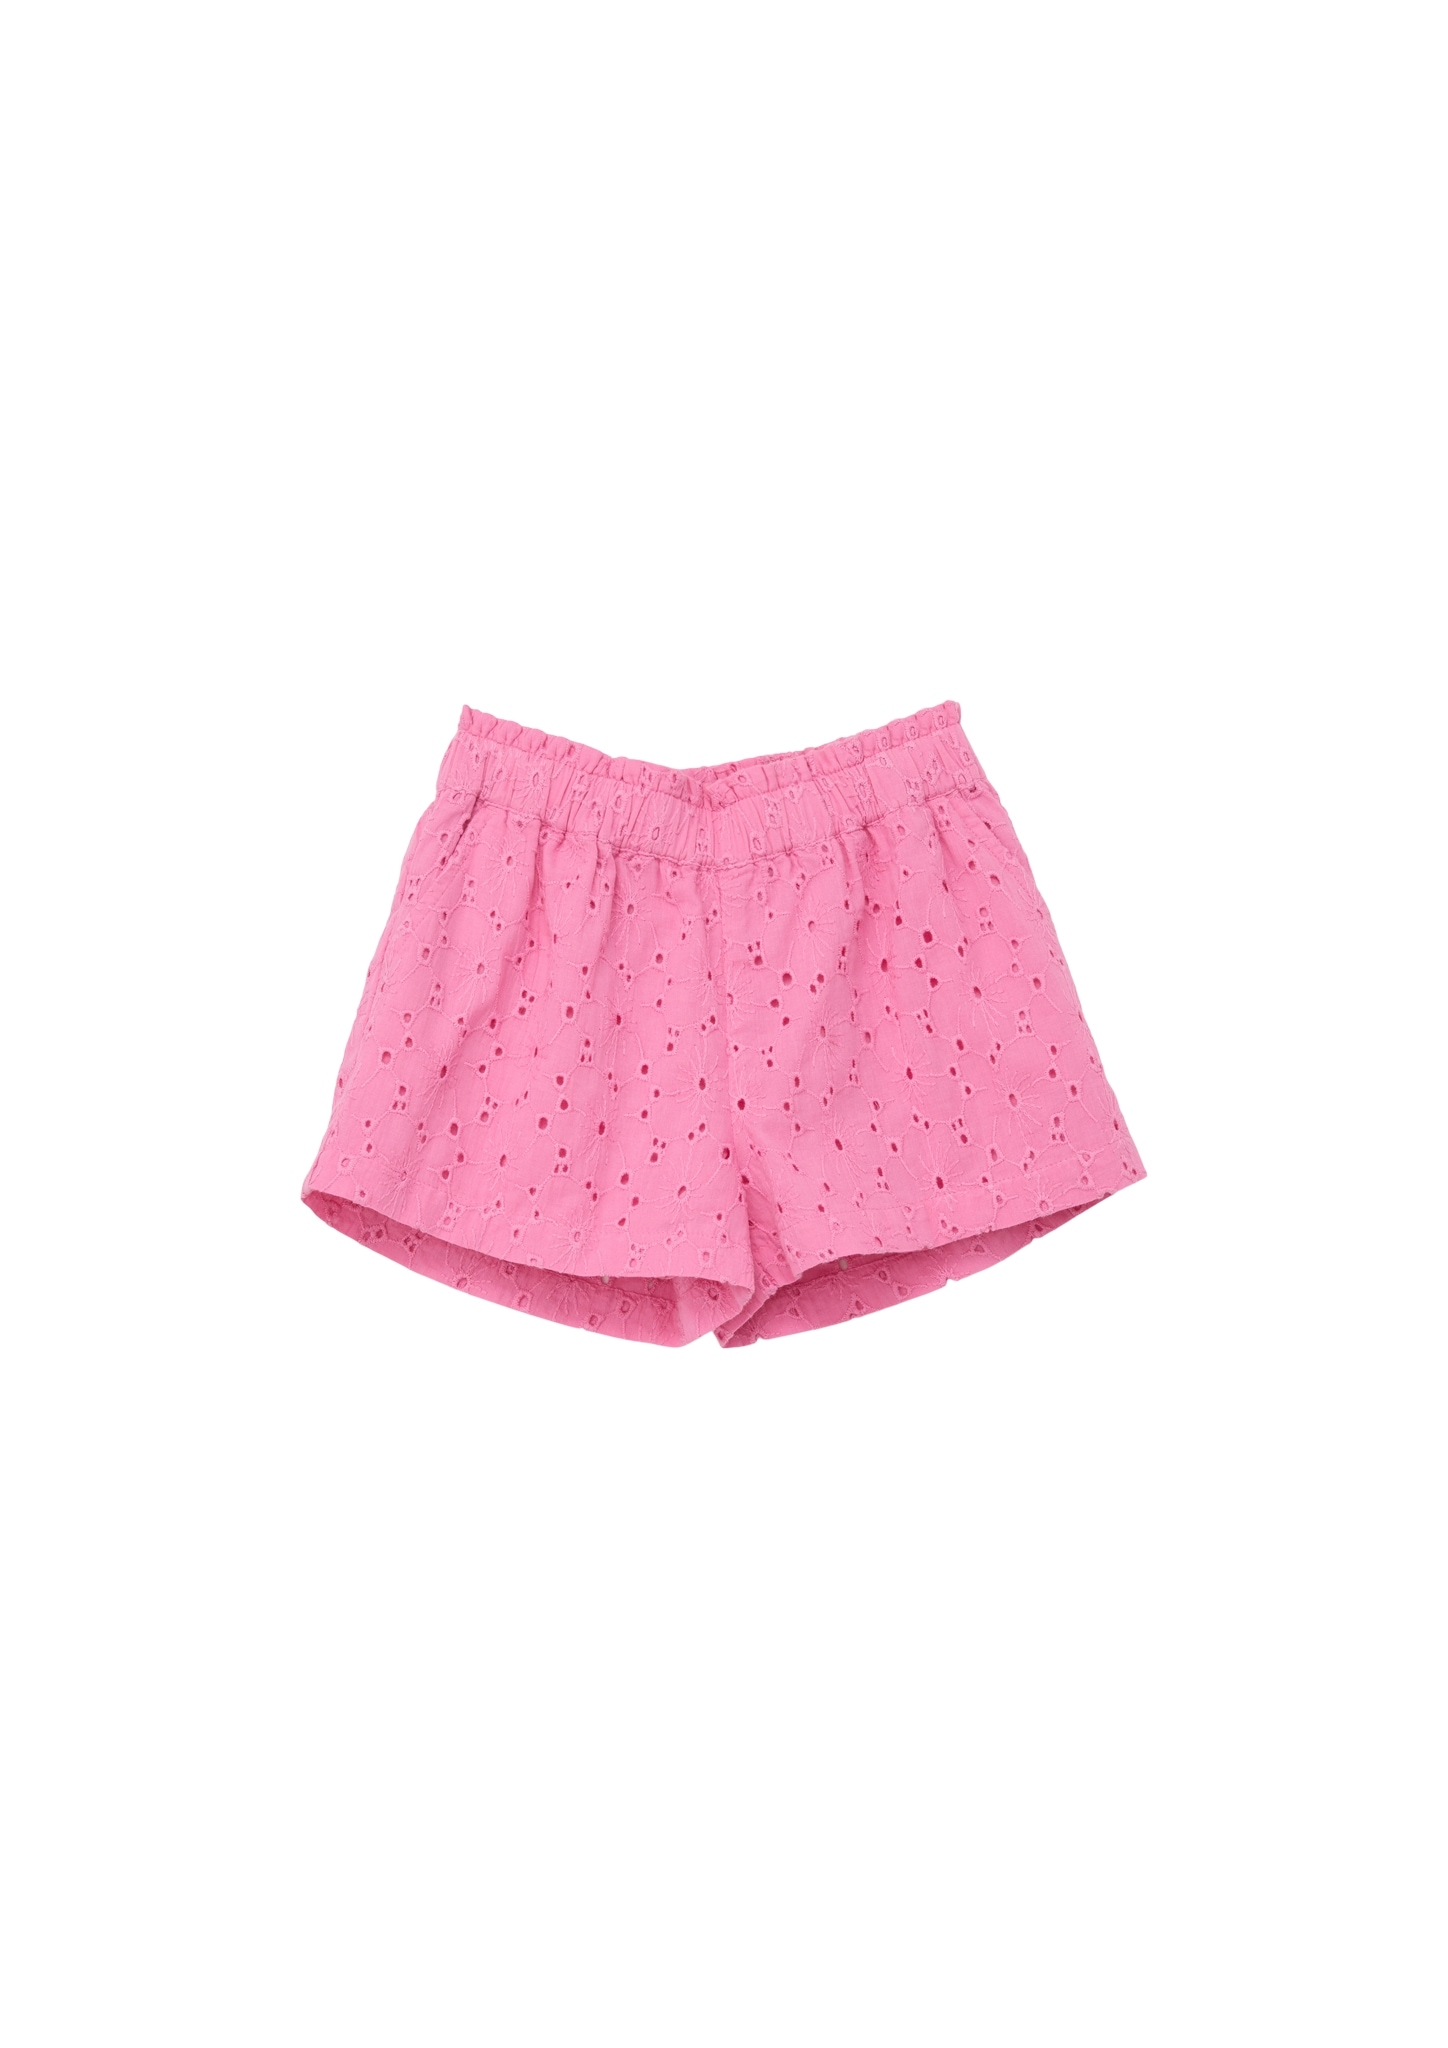 Broderie bei Anglaise OTTO Junior mit Shorts, s.Oliver